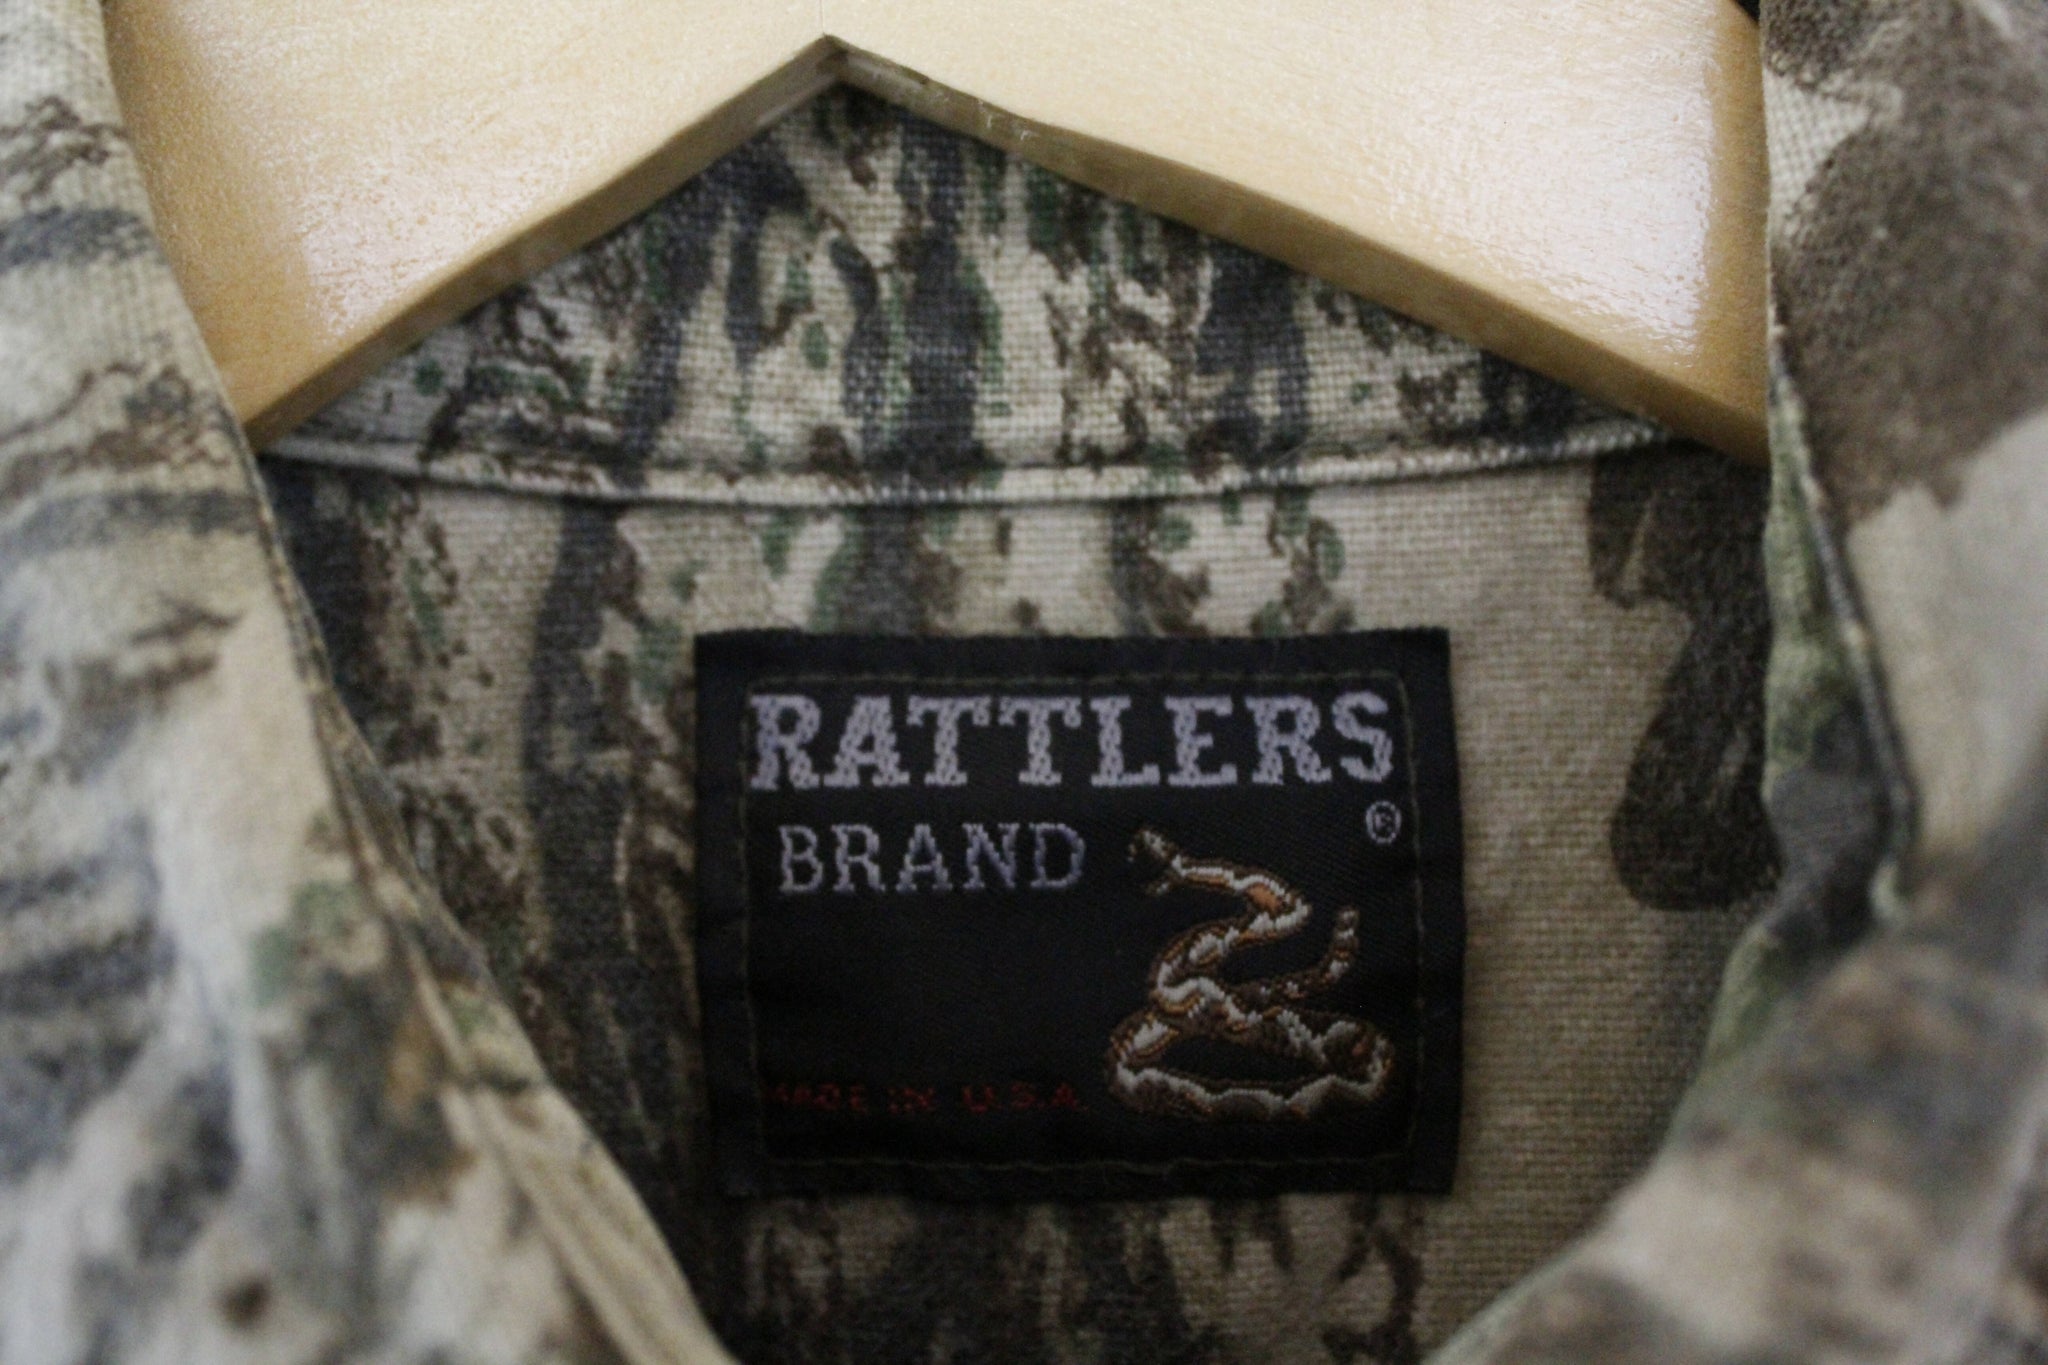 Vintage Rattlers Brand Realtree Camo Heavy Duty Chamois Hunting